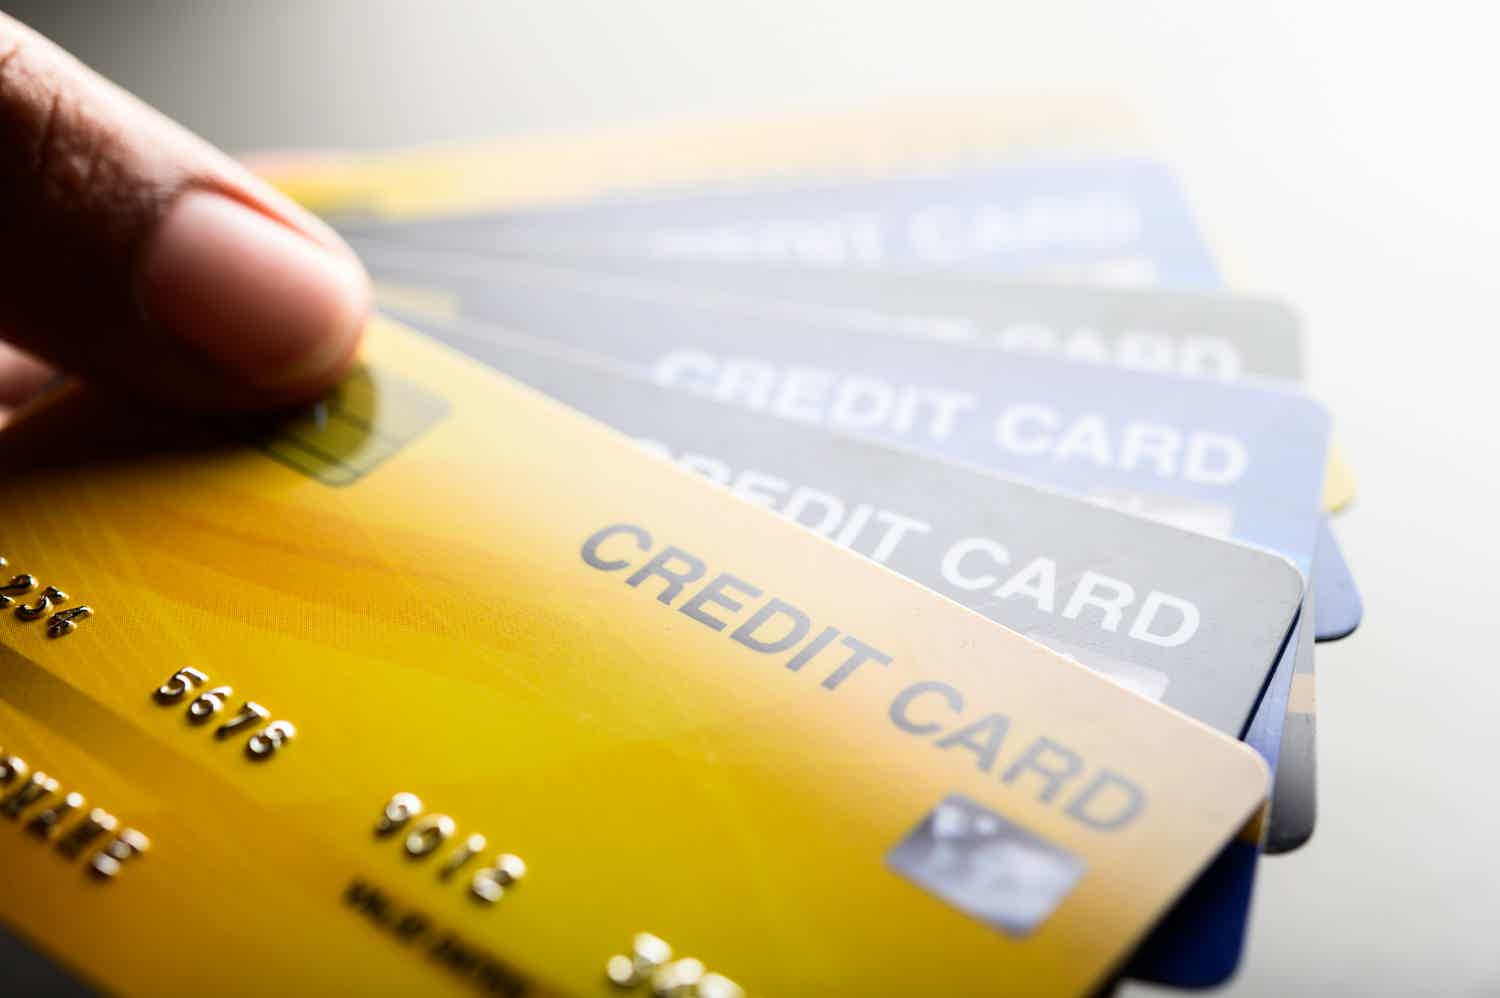 Choose the best type of credit card for you. Source: Freepik.